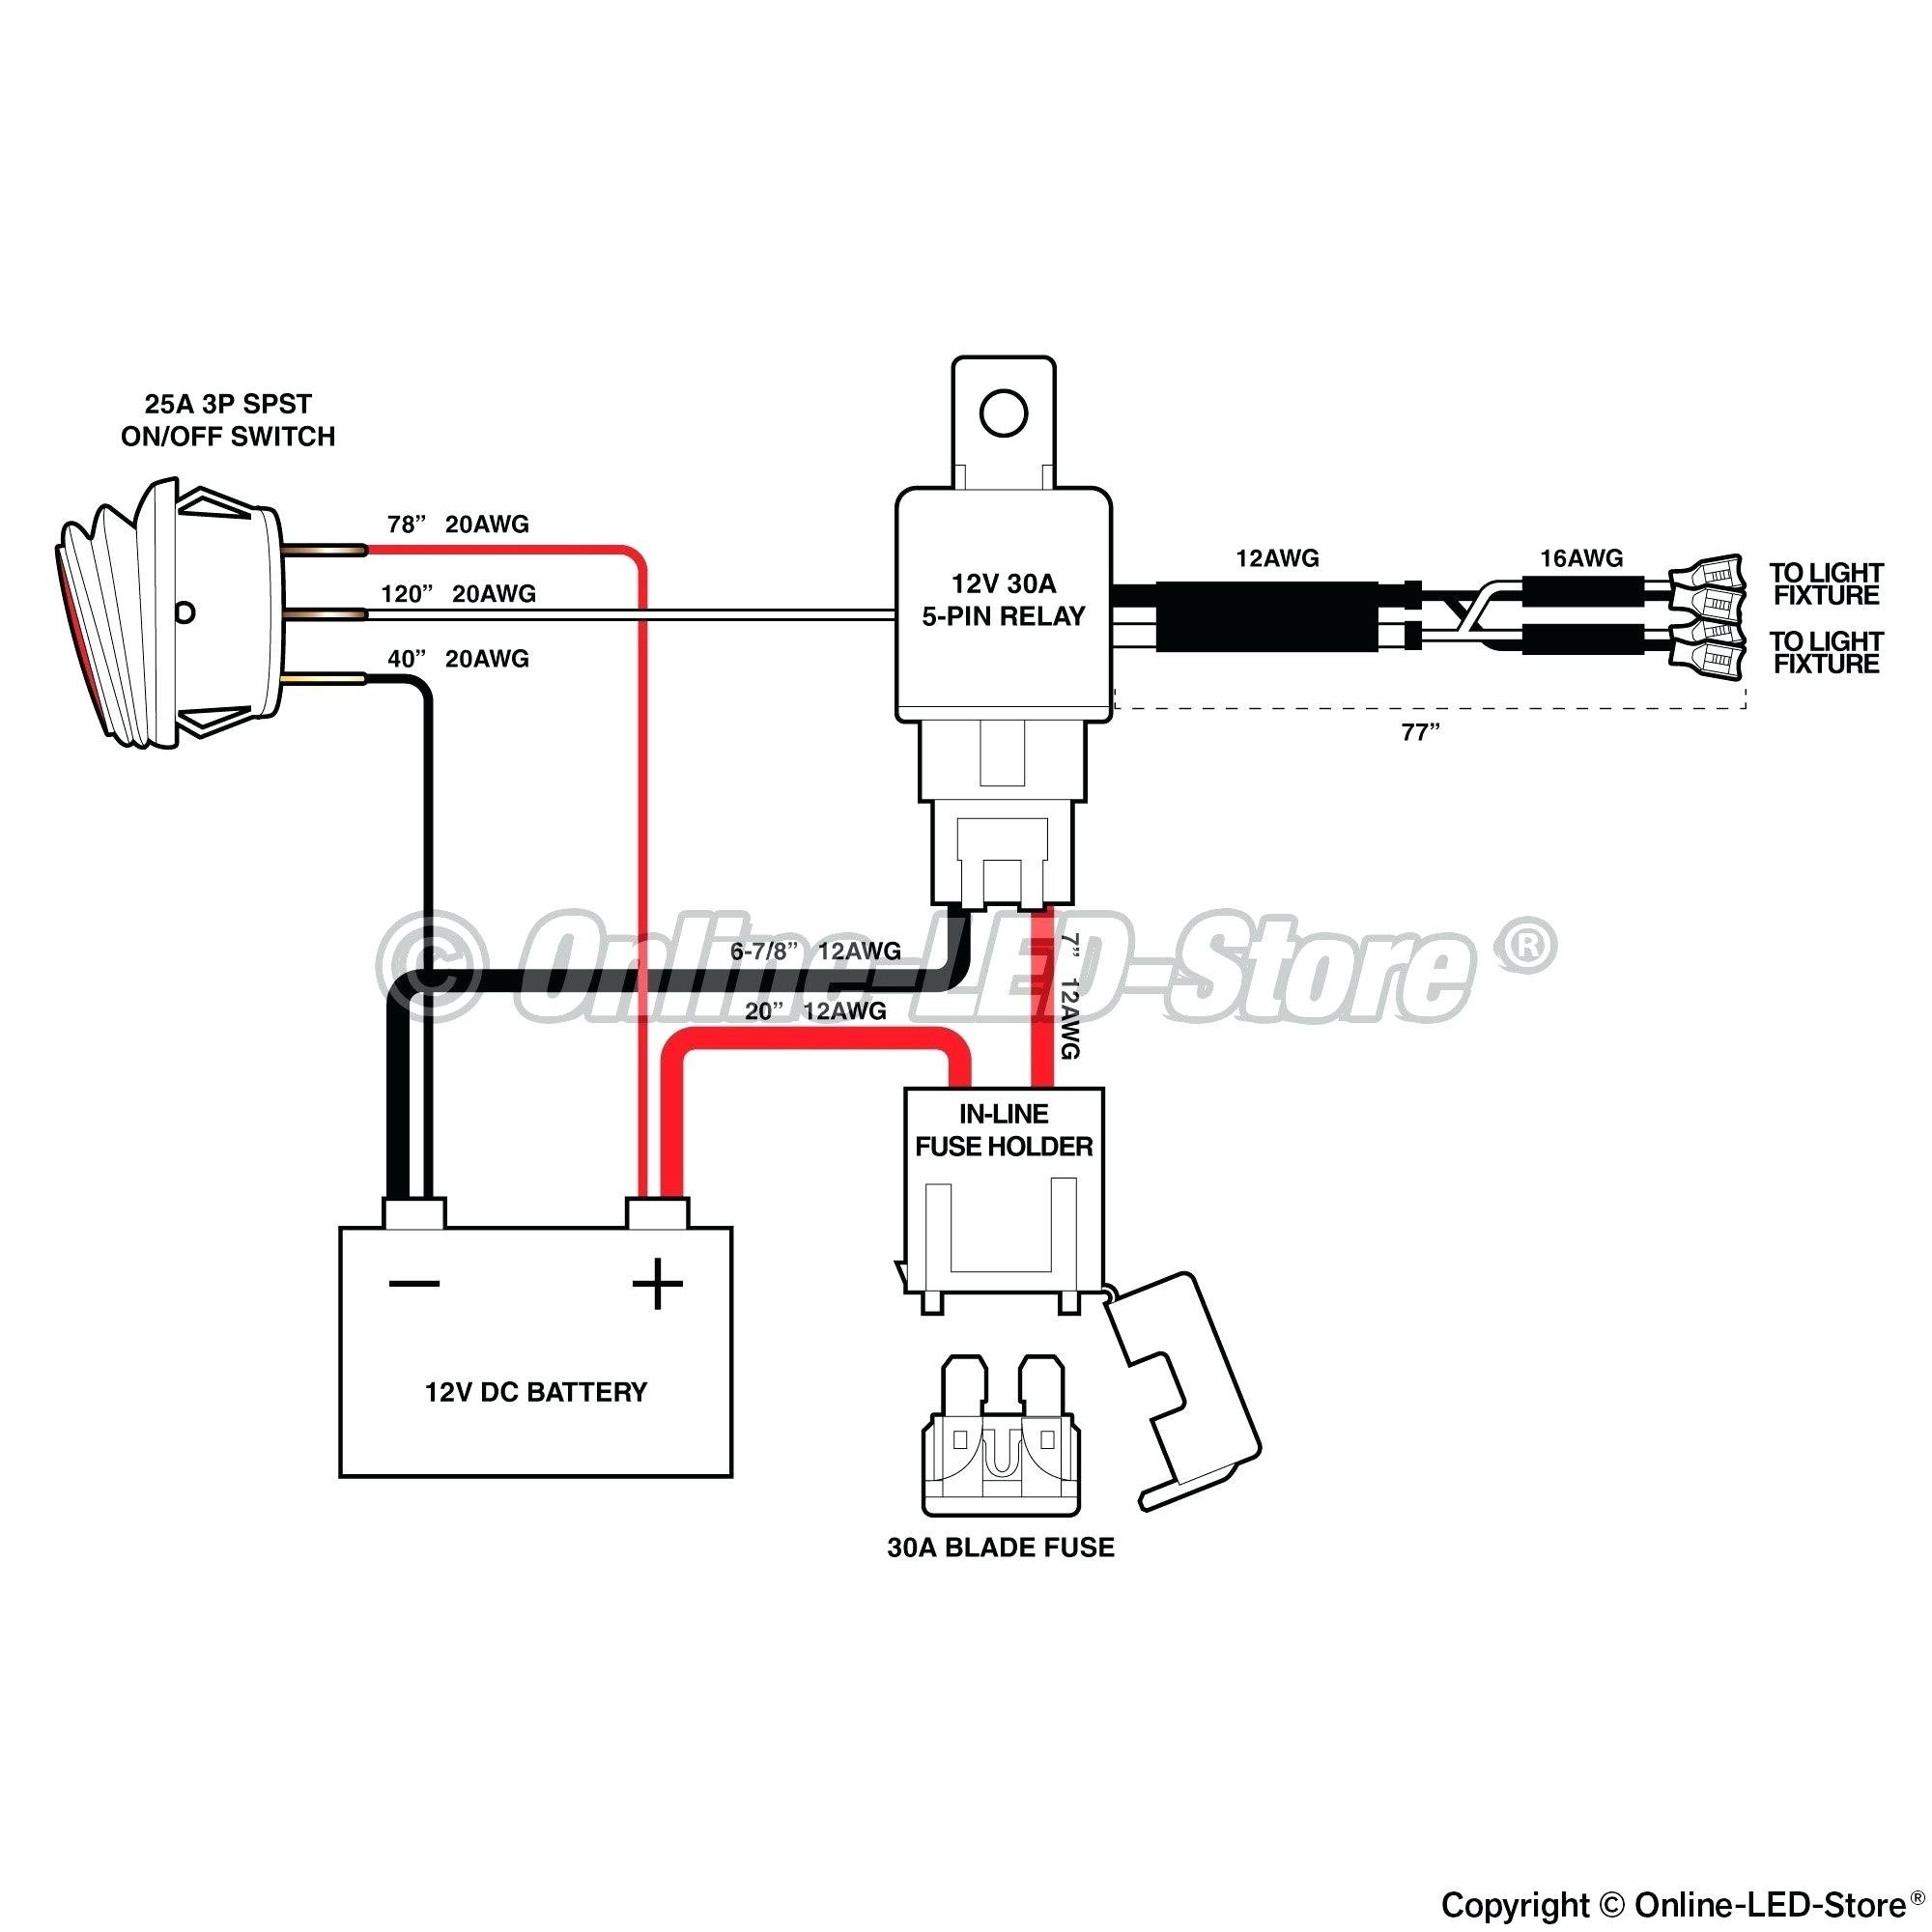 Dorable Fan Controller Wiring Frieze Everything You Need to Know That image Flex A Lite Fan Controller Wiring Diagram